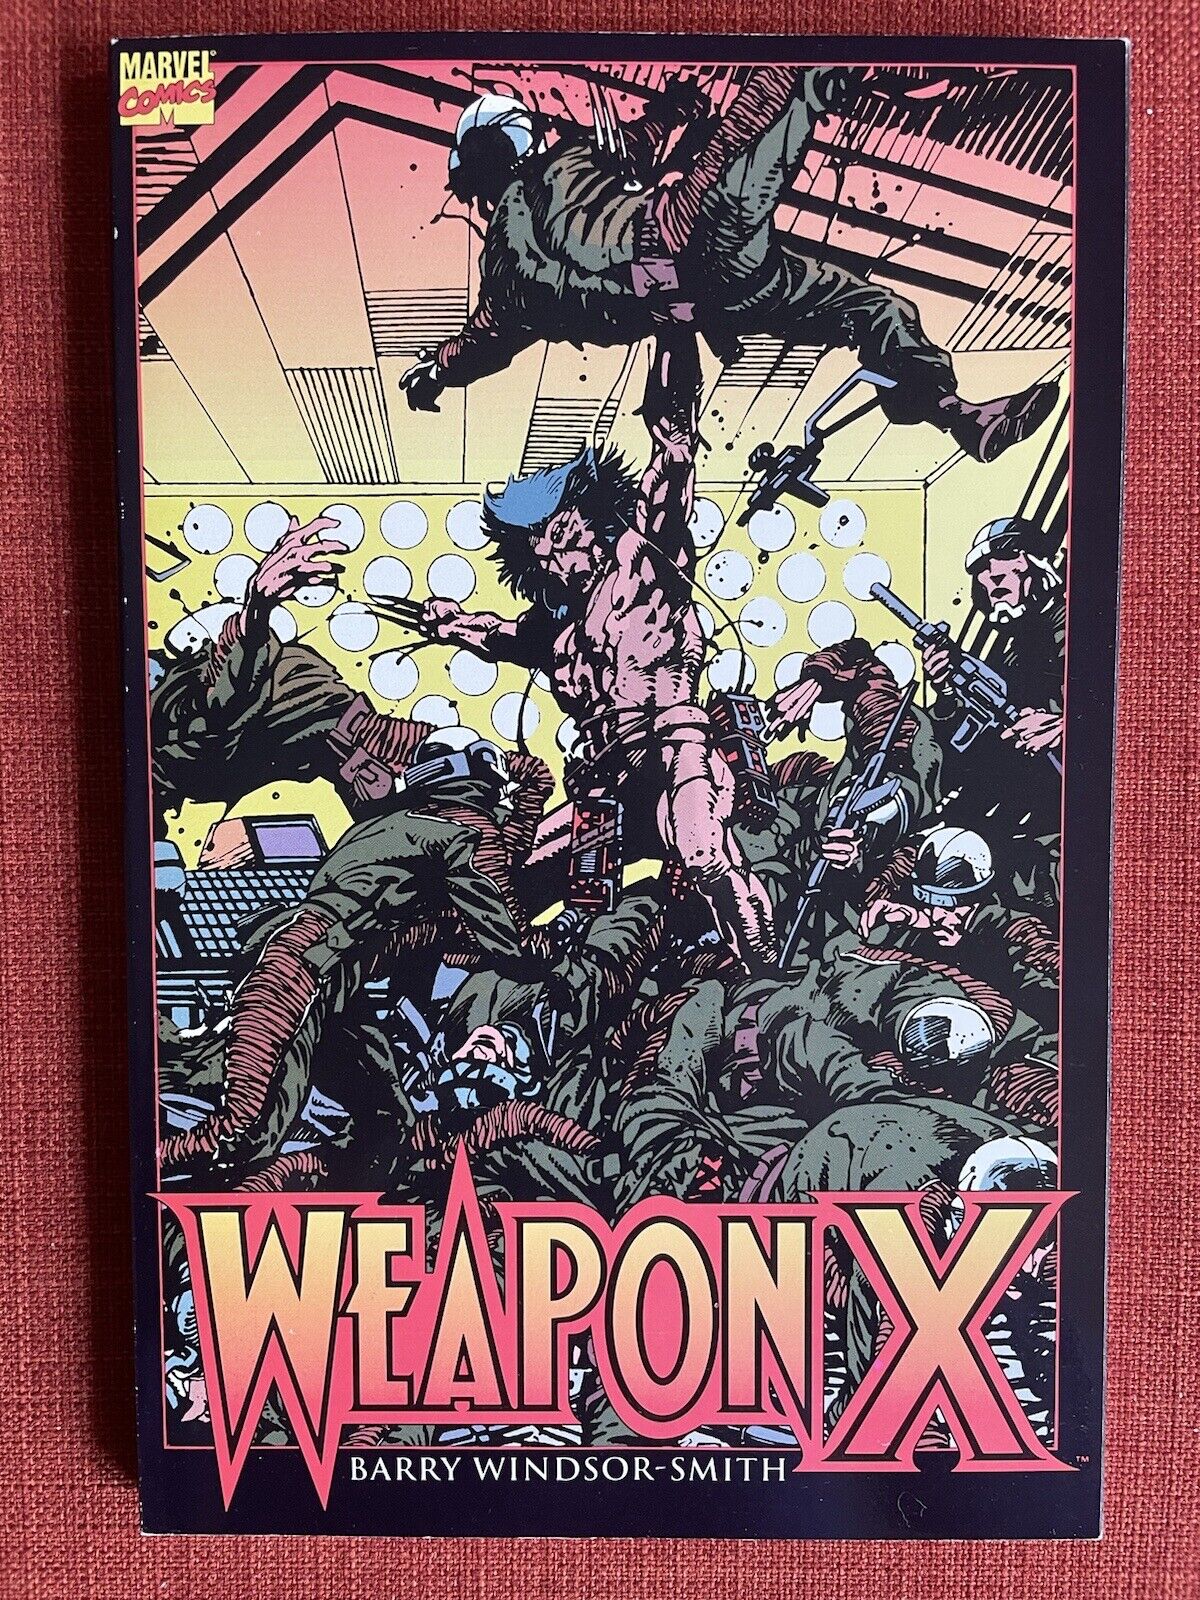 WEAPON X TPB, FIRST EDITION, 1994, WOLVERINE, BARRY WINDSOR-SMITH, X-MEN, MARVEL